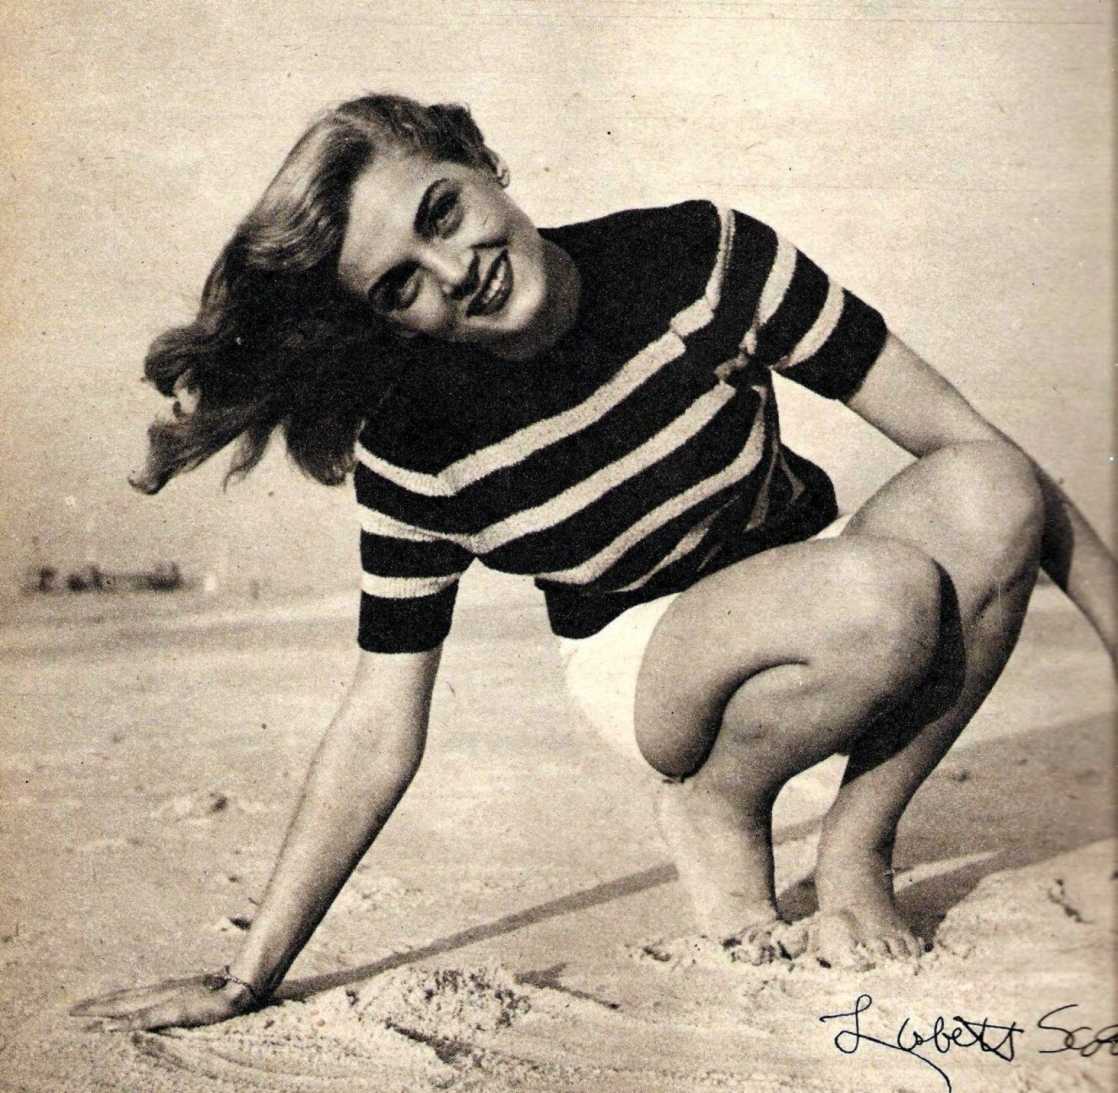 51 Sexy Lizabeth Scott Boobs Pictures Which Will Make You Succumb To Her 7